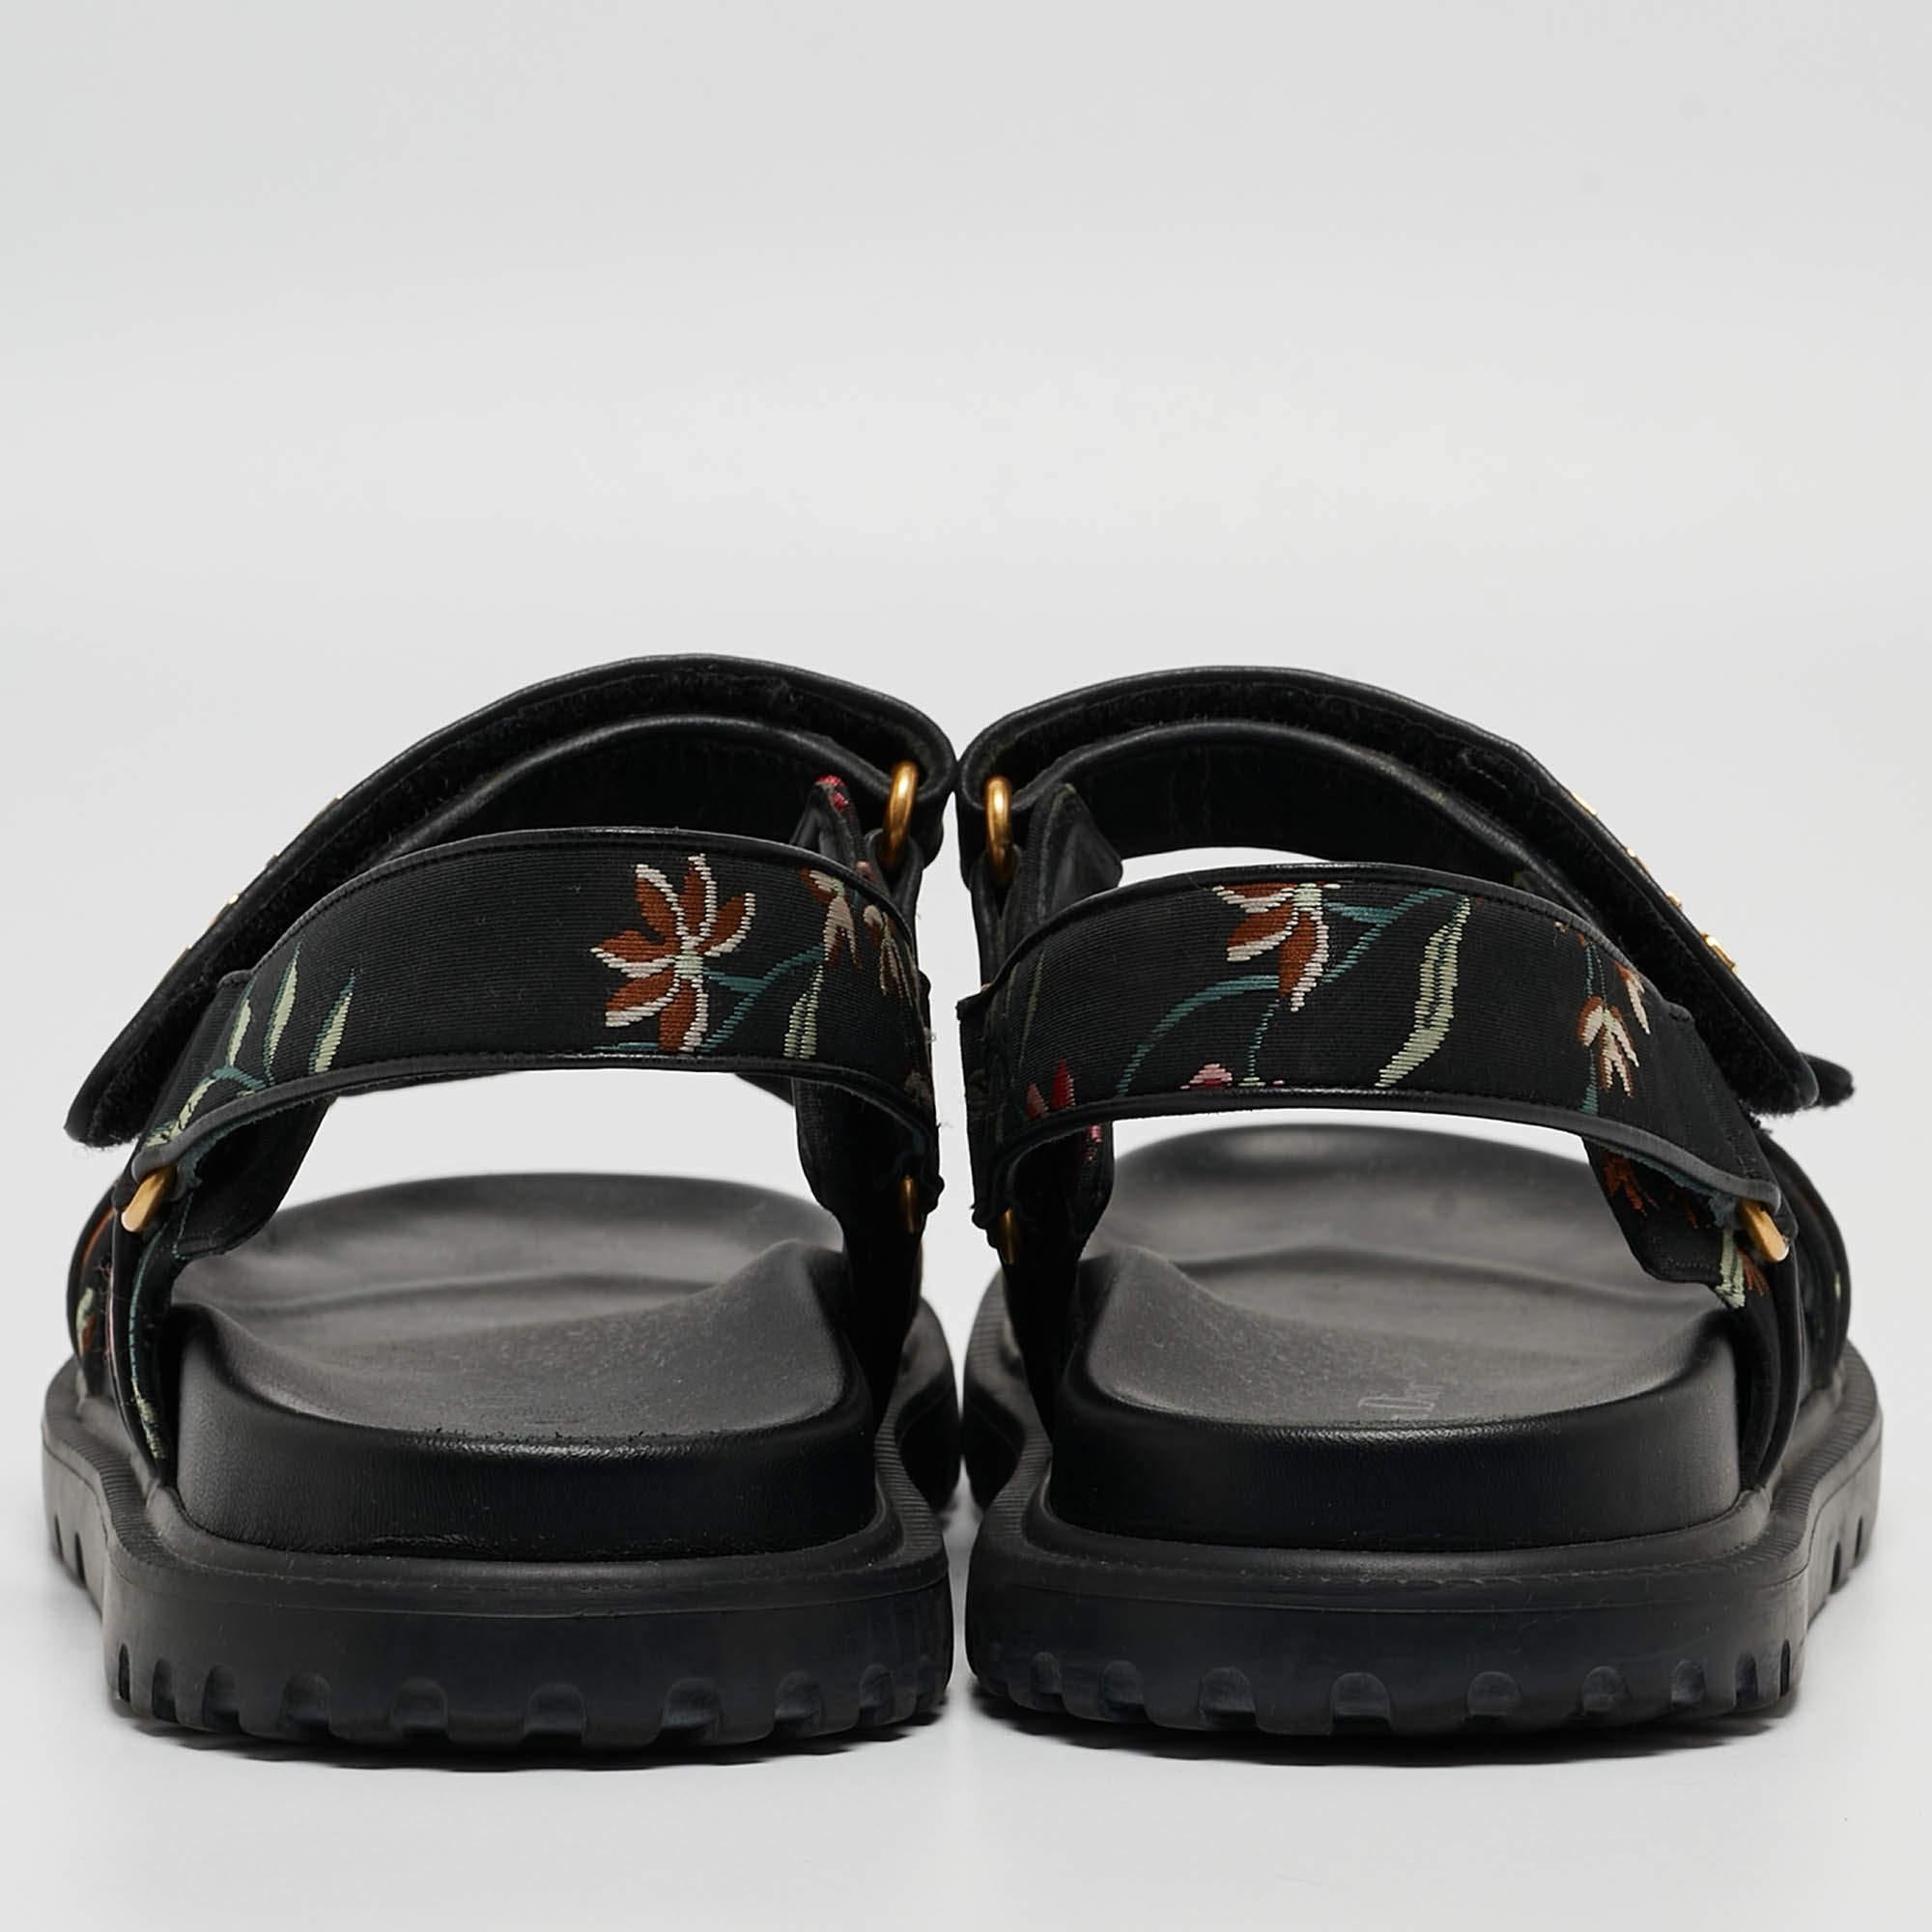 Dior Black Floral Print Fabric DiorAct Sandals Size 38.5 2